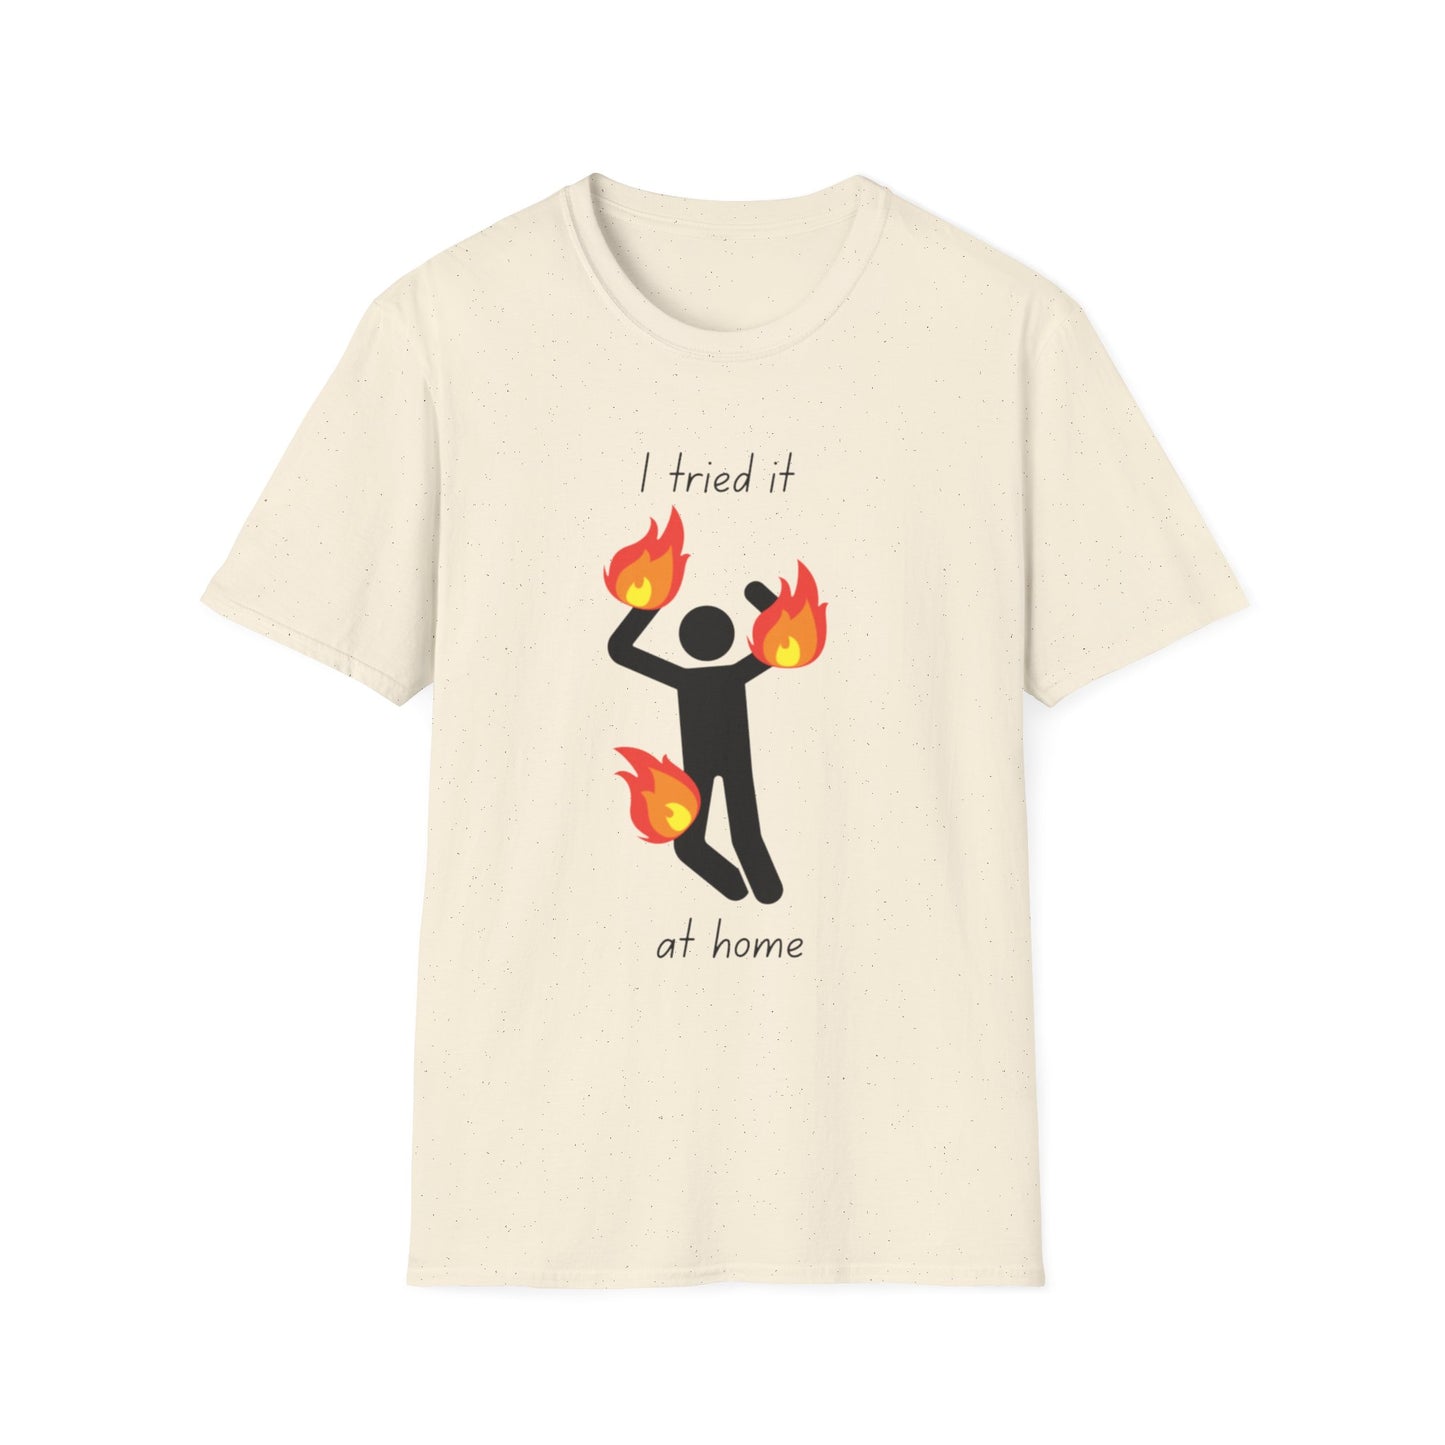 I Tried It at Home - Unisex Softstyle T-Shirt